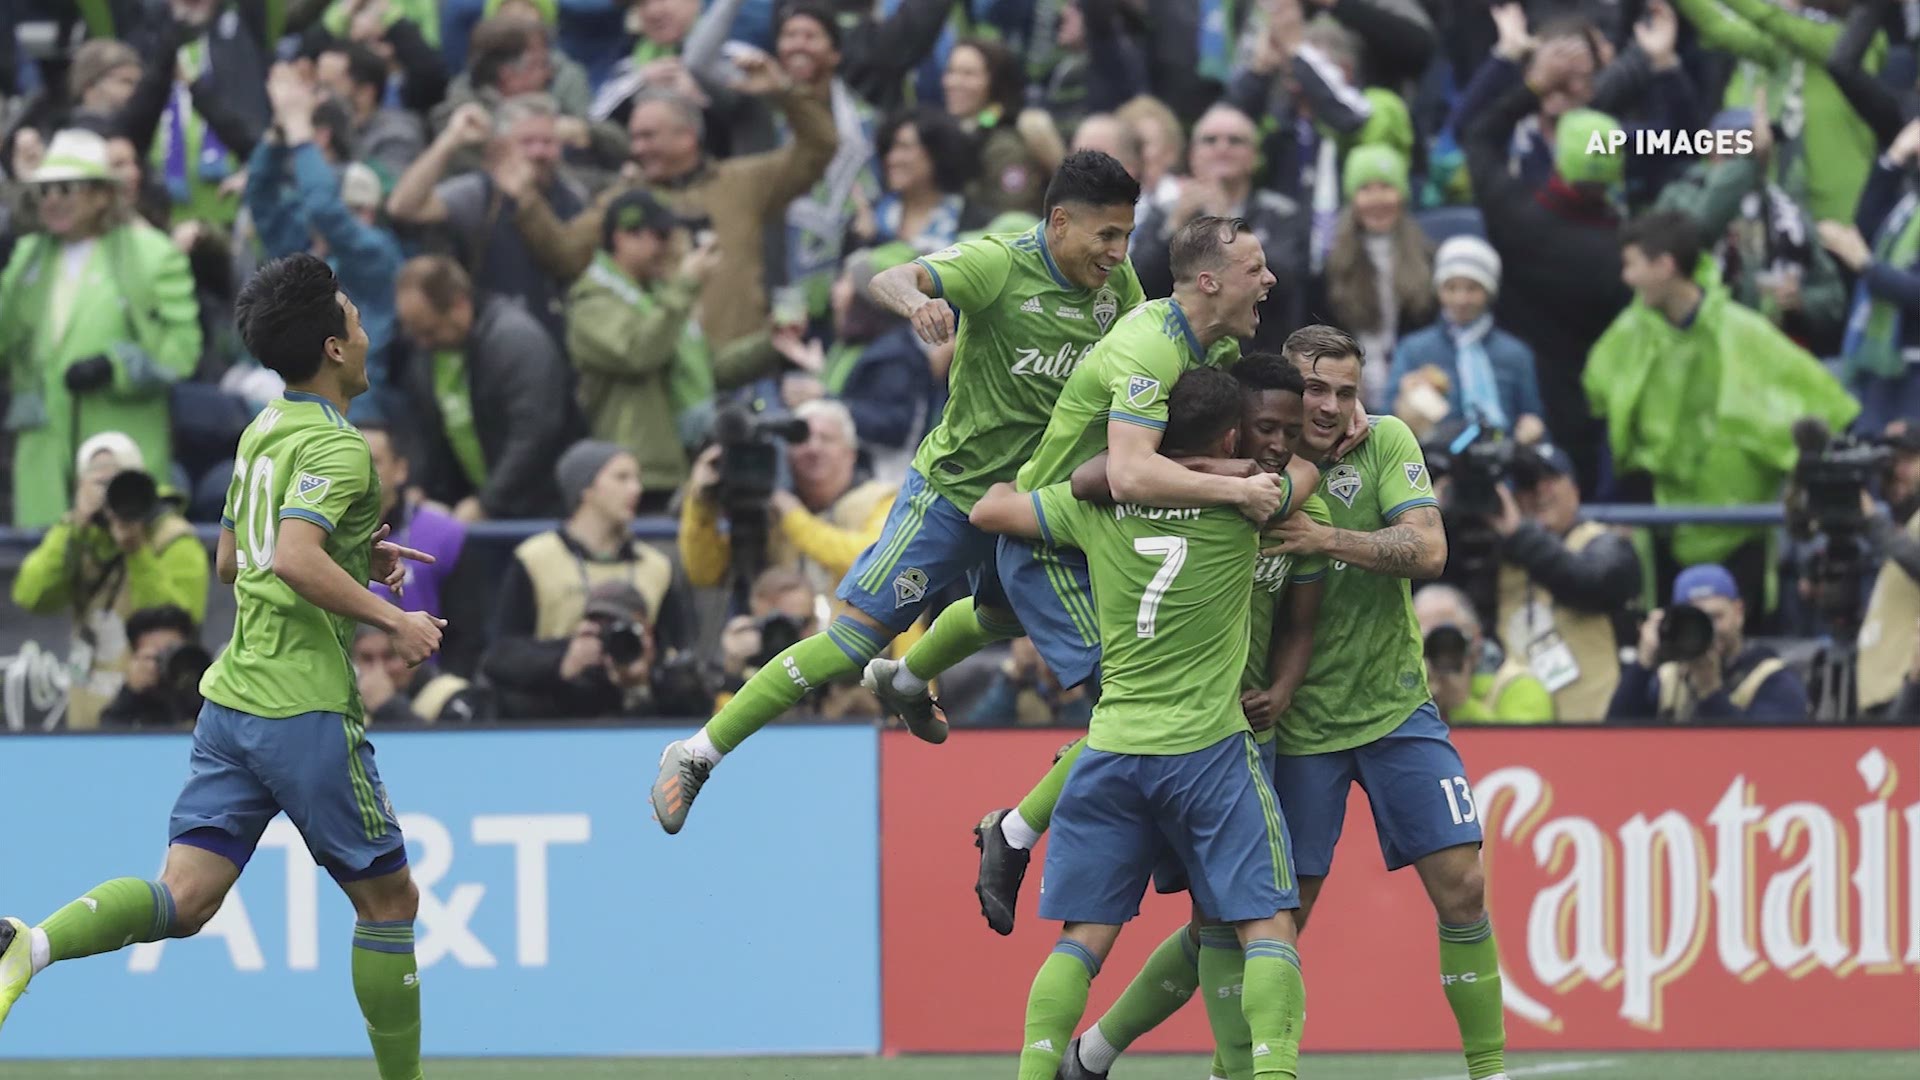 The team announced a citywide celebration will be held Tuesday at noon after their 3-1 win over Toronto for the MLS Cup Championship. KING 5's Chris Egan reports.